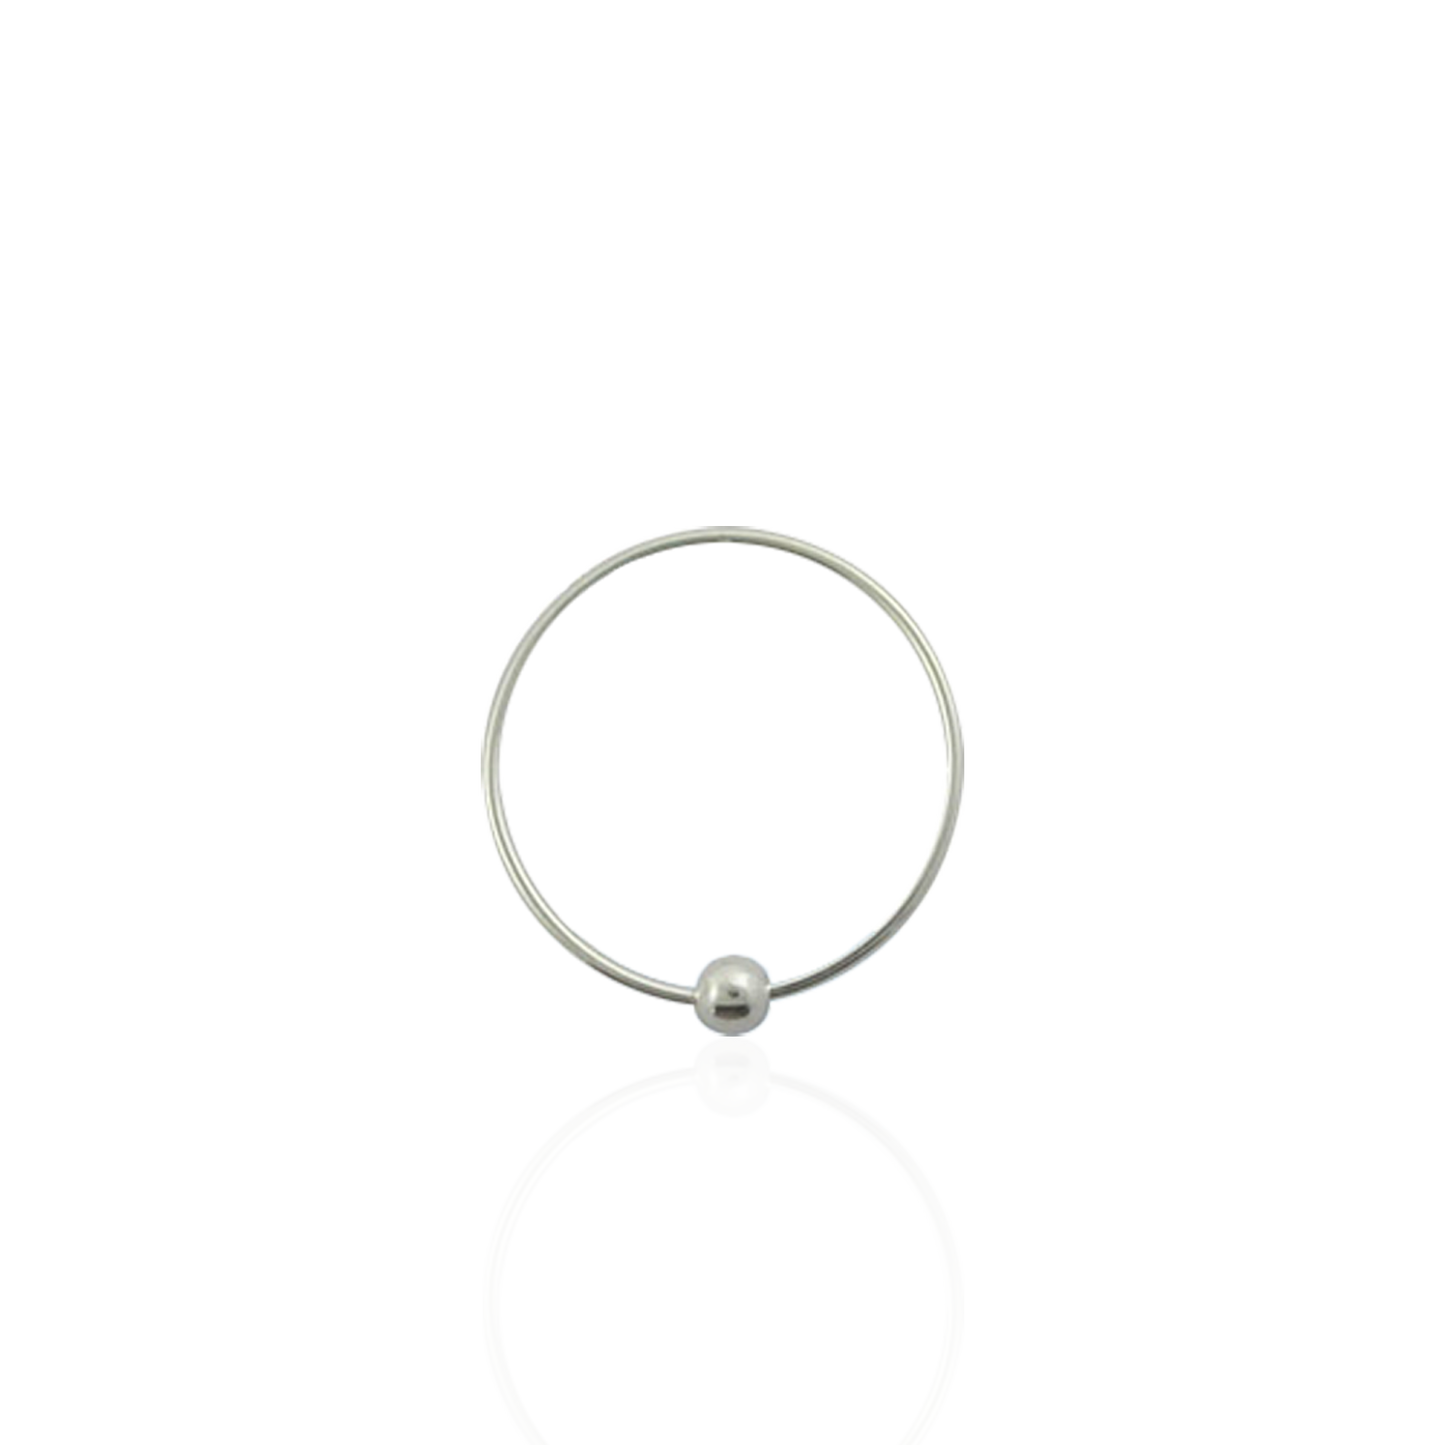 Silver Nose Ring